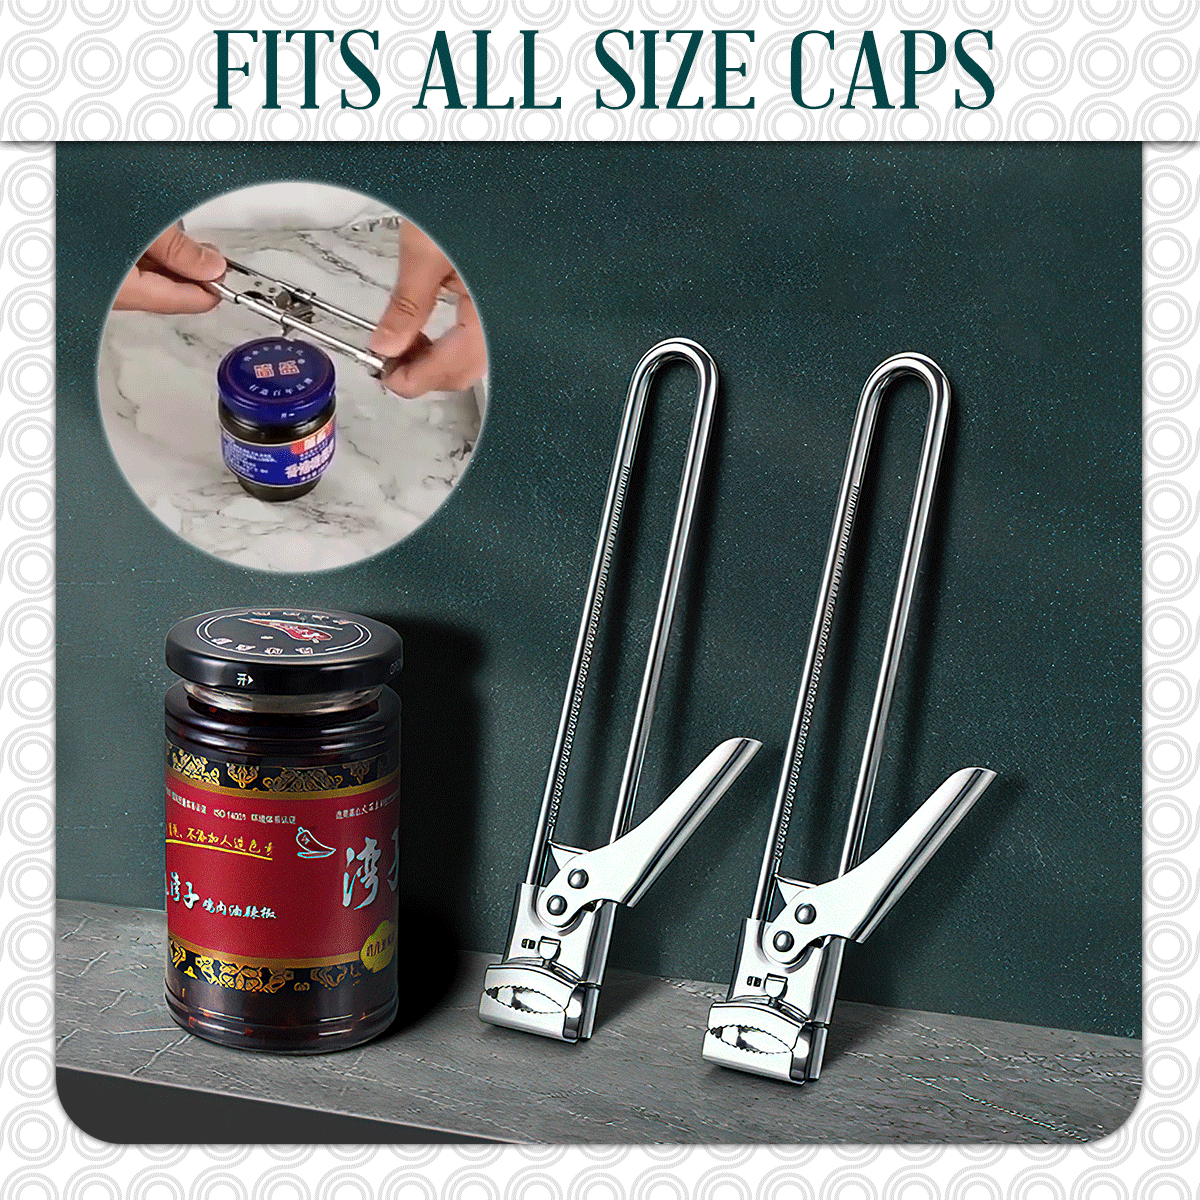 THIS IS A DISCOUNT FOR YOU - Adjustable Multi-Function Bottle Cap Opener